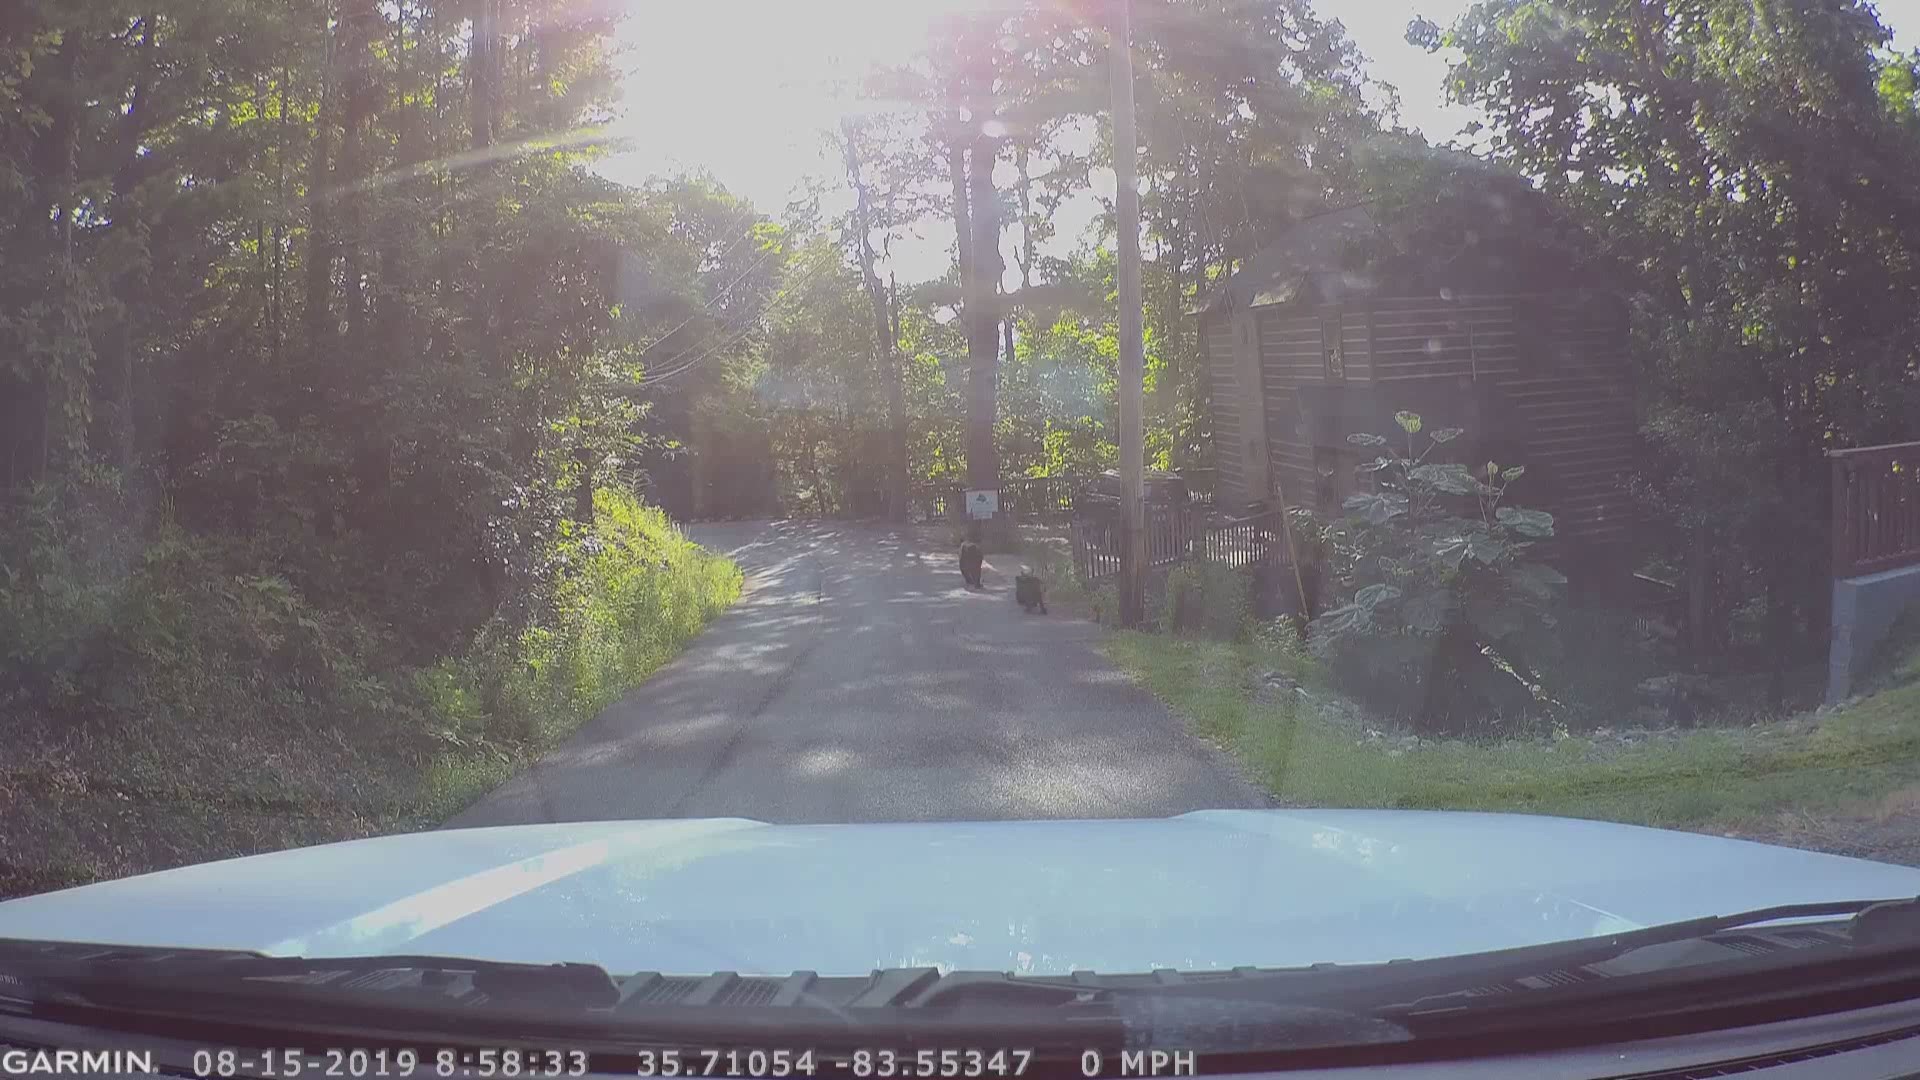 This mother bear wanted to see what was inside a minivan parked outside a Gatlinburg cabin, so she just popped open the door and peeped inside! Luckily, no damage was done.